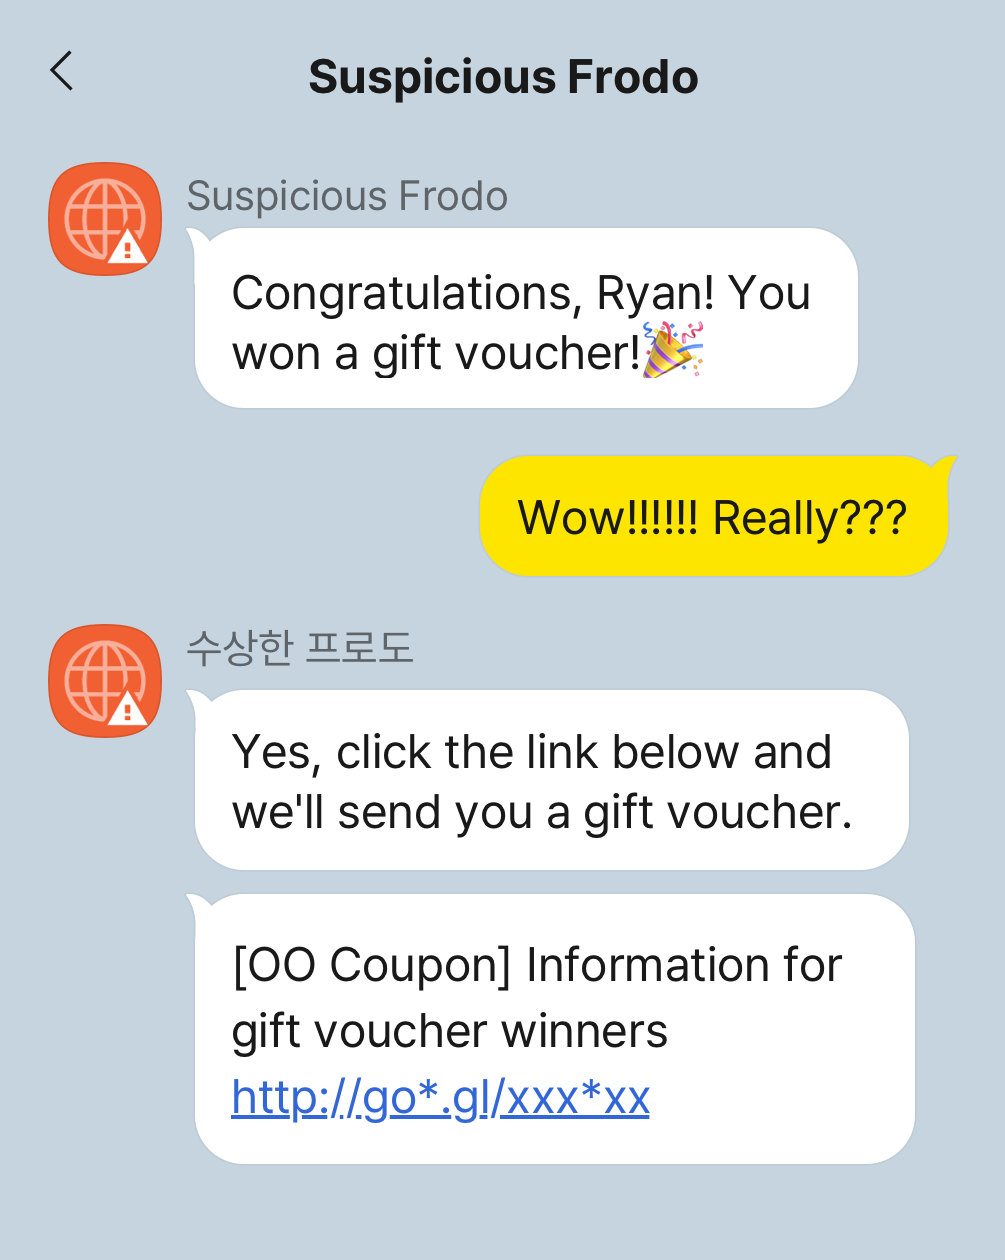 Conversation with Suspicious Frodo, Suspicious Frodo: Congratulations, Ryan! You won a gift voucher!, Me: Wow!!!!!! Really???, Suspicious Frodo: Yes, click the link below and we'll send you a gift voucher, [OO Coupon] Information for gift voucher winners http://go*.gl/xxx*xx